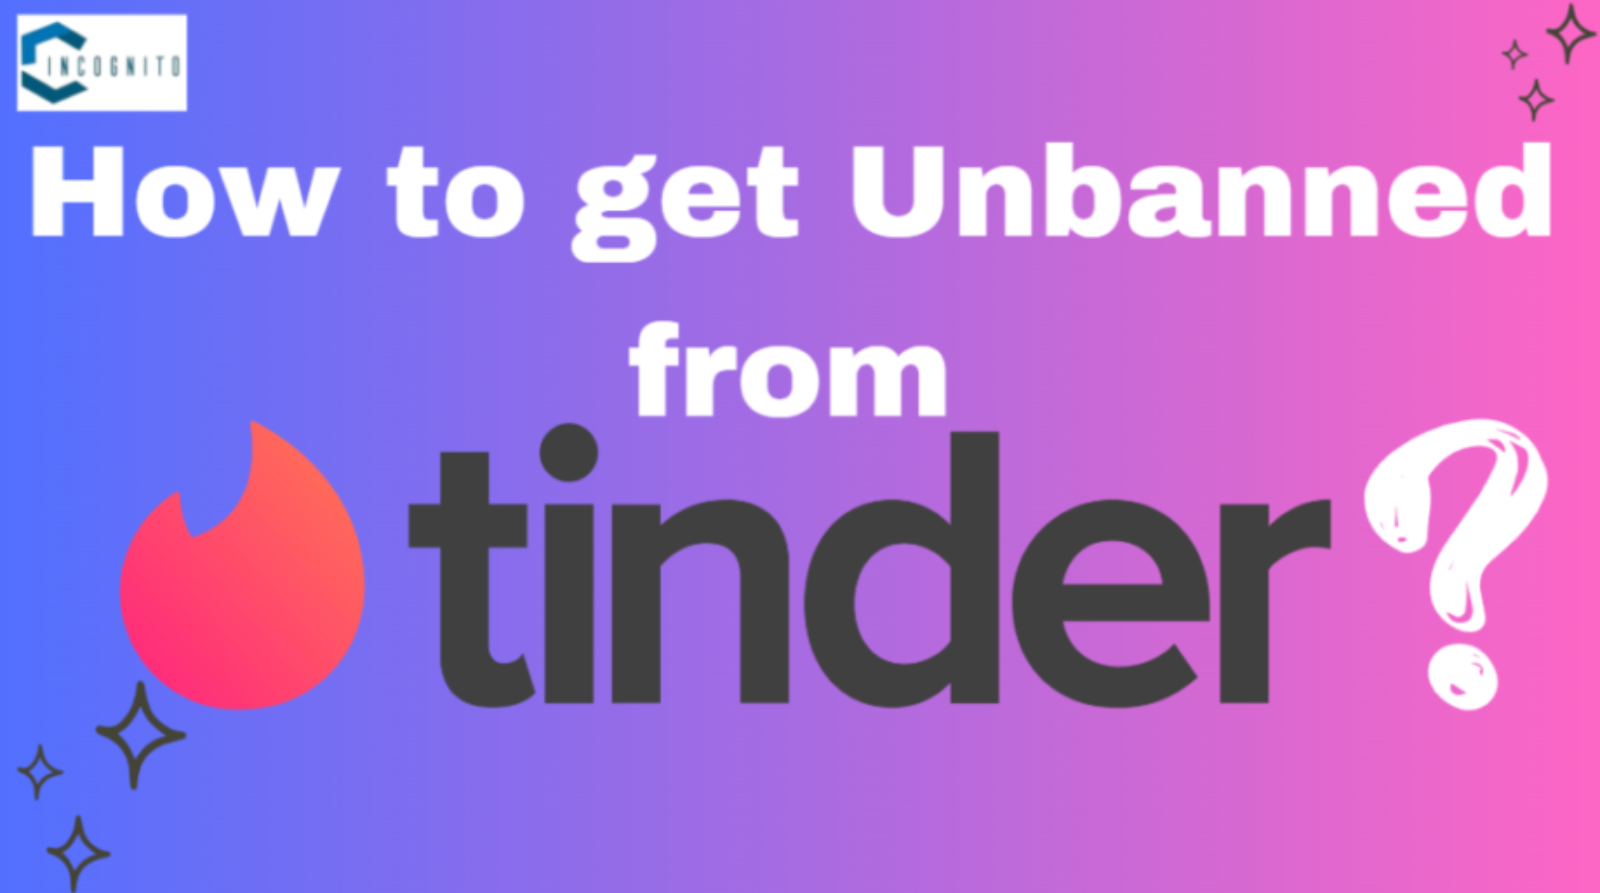 How to get unbanned from tinder